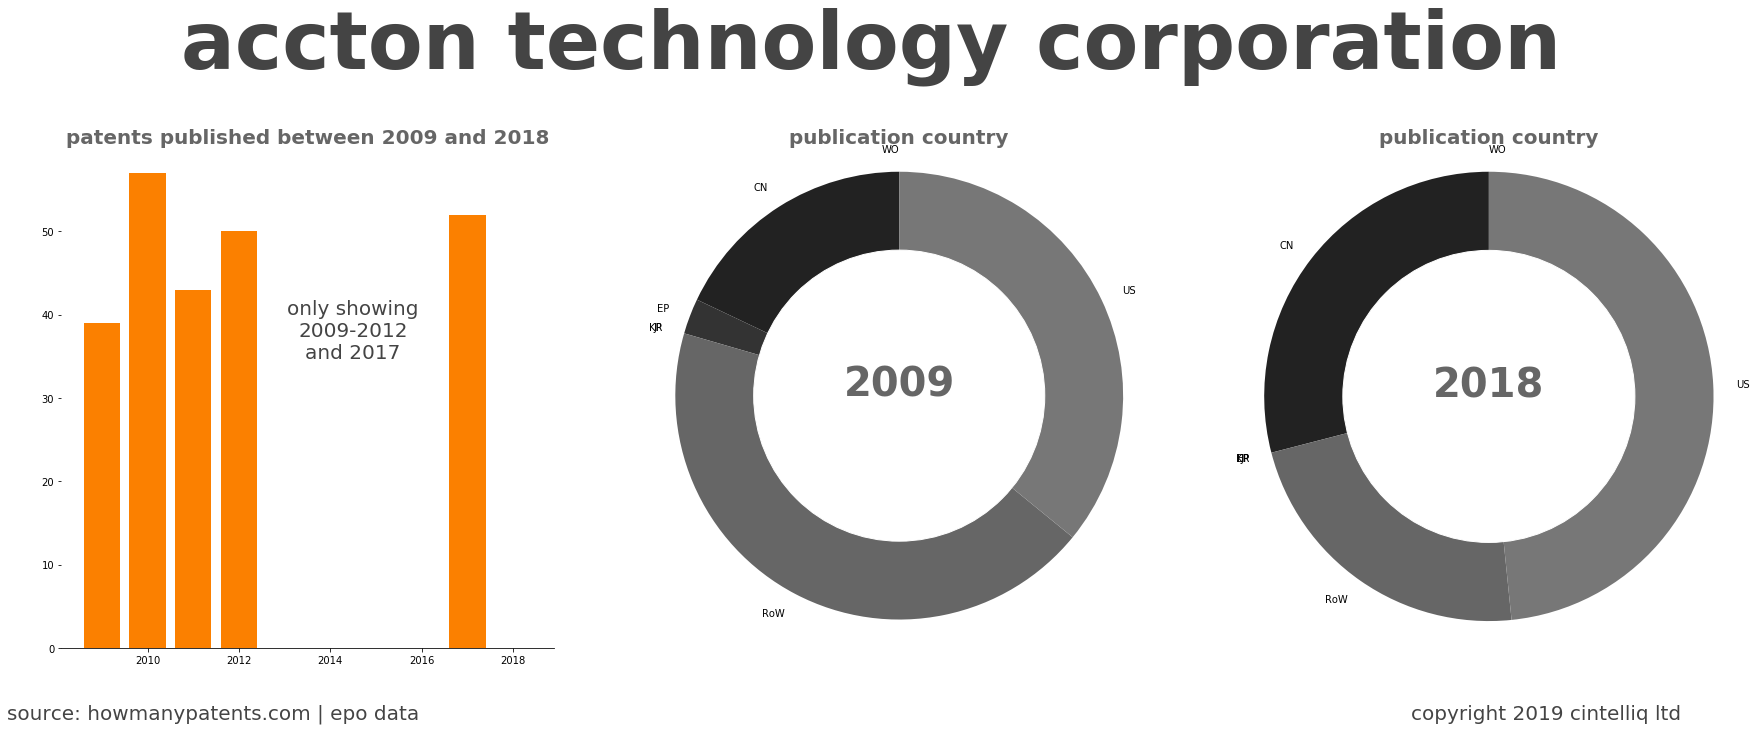 summary of patents for Accton Technology Corporation